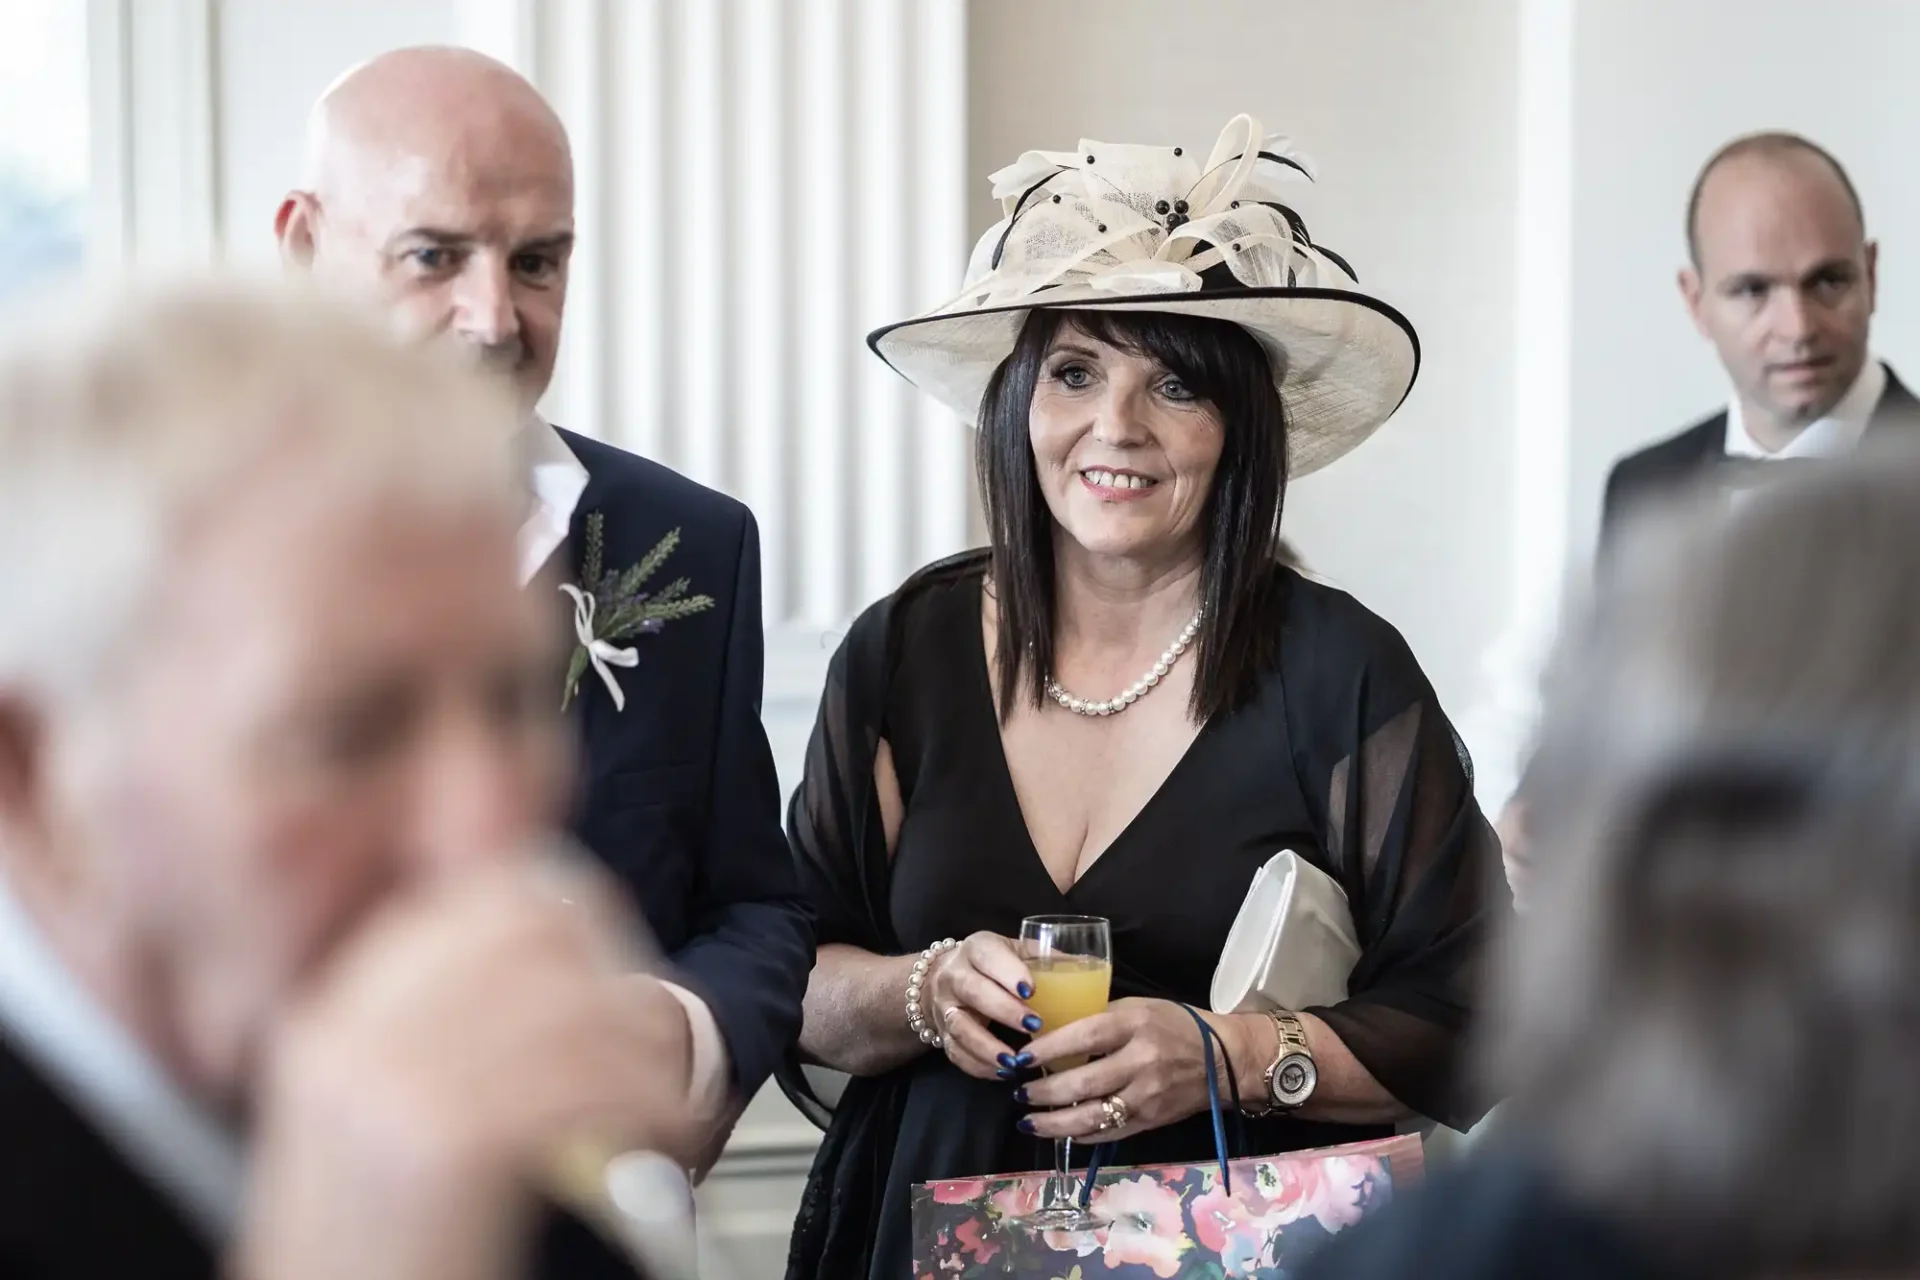 A woman in a black dress and a wide-brimmed hat holds a drink at a social gathering, with men in suits visible in the background.